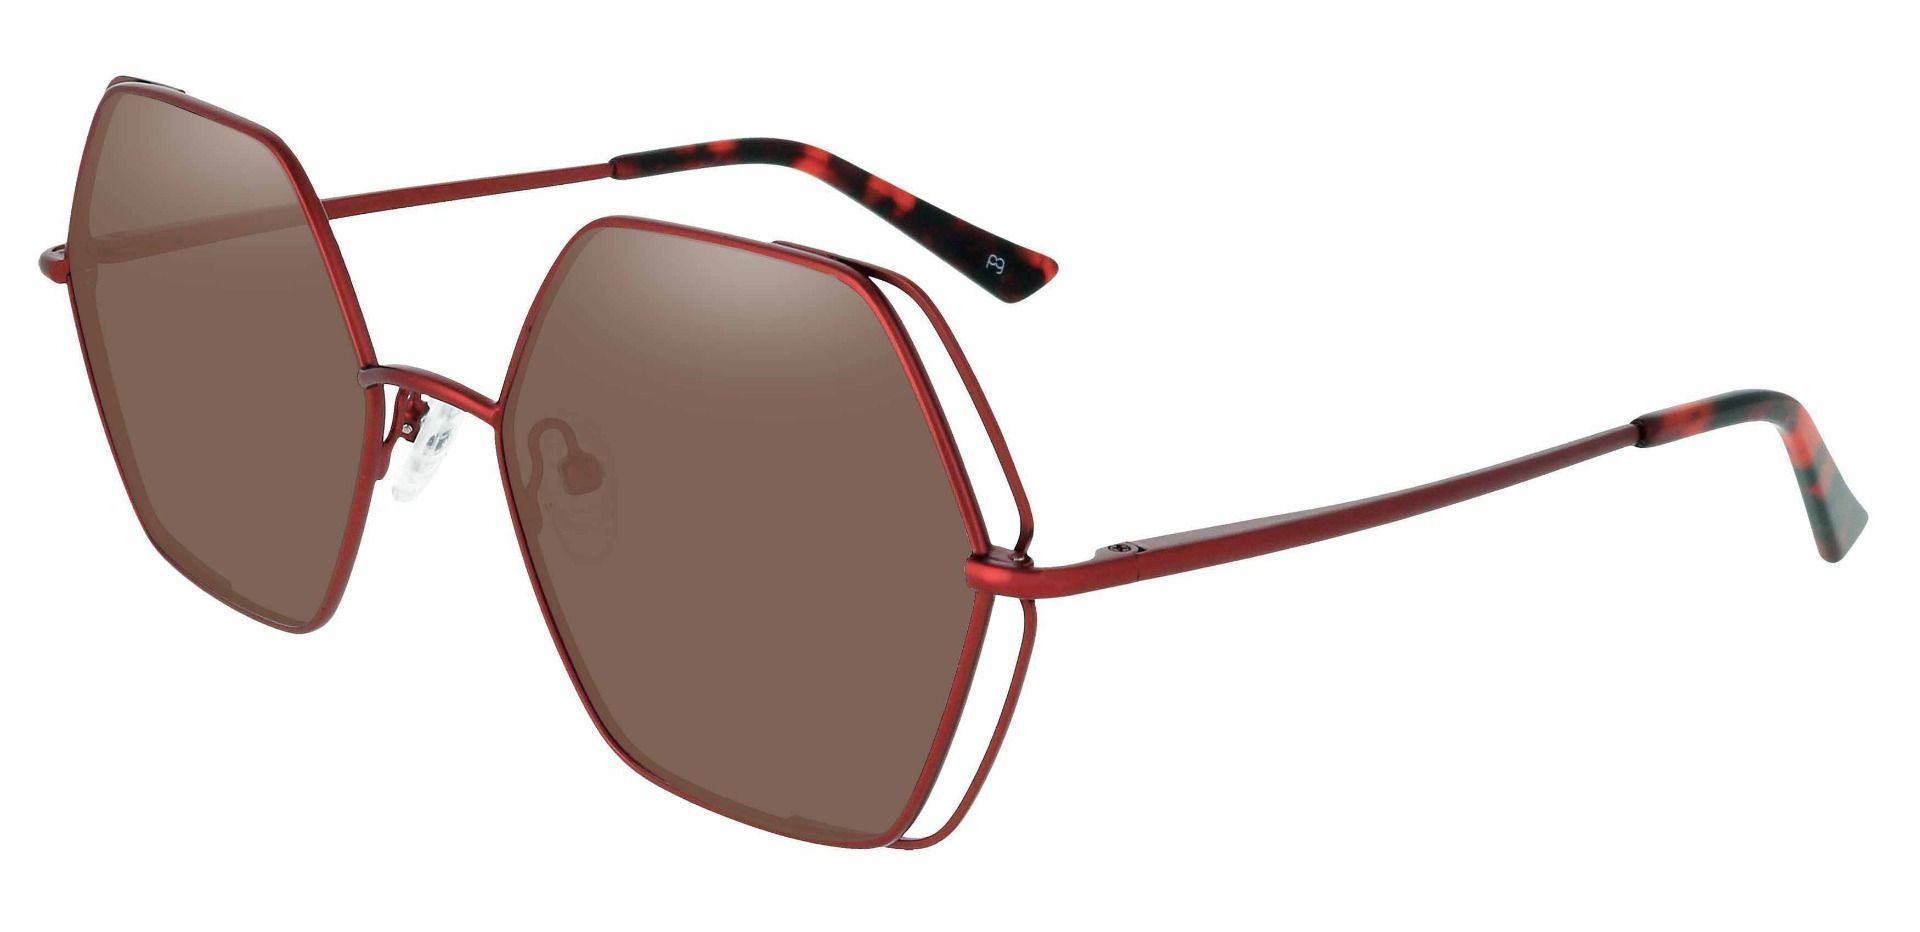 Hawley Geometric Lined Bifocal Sunglasses - Red Frame With Brown Lenses